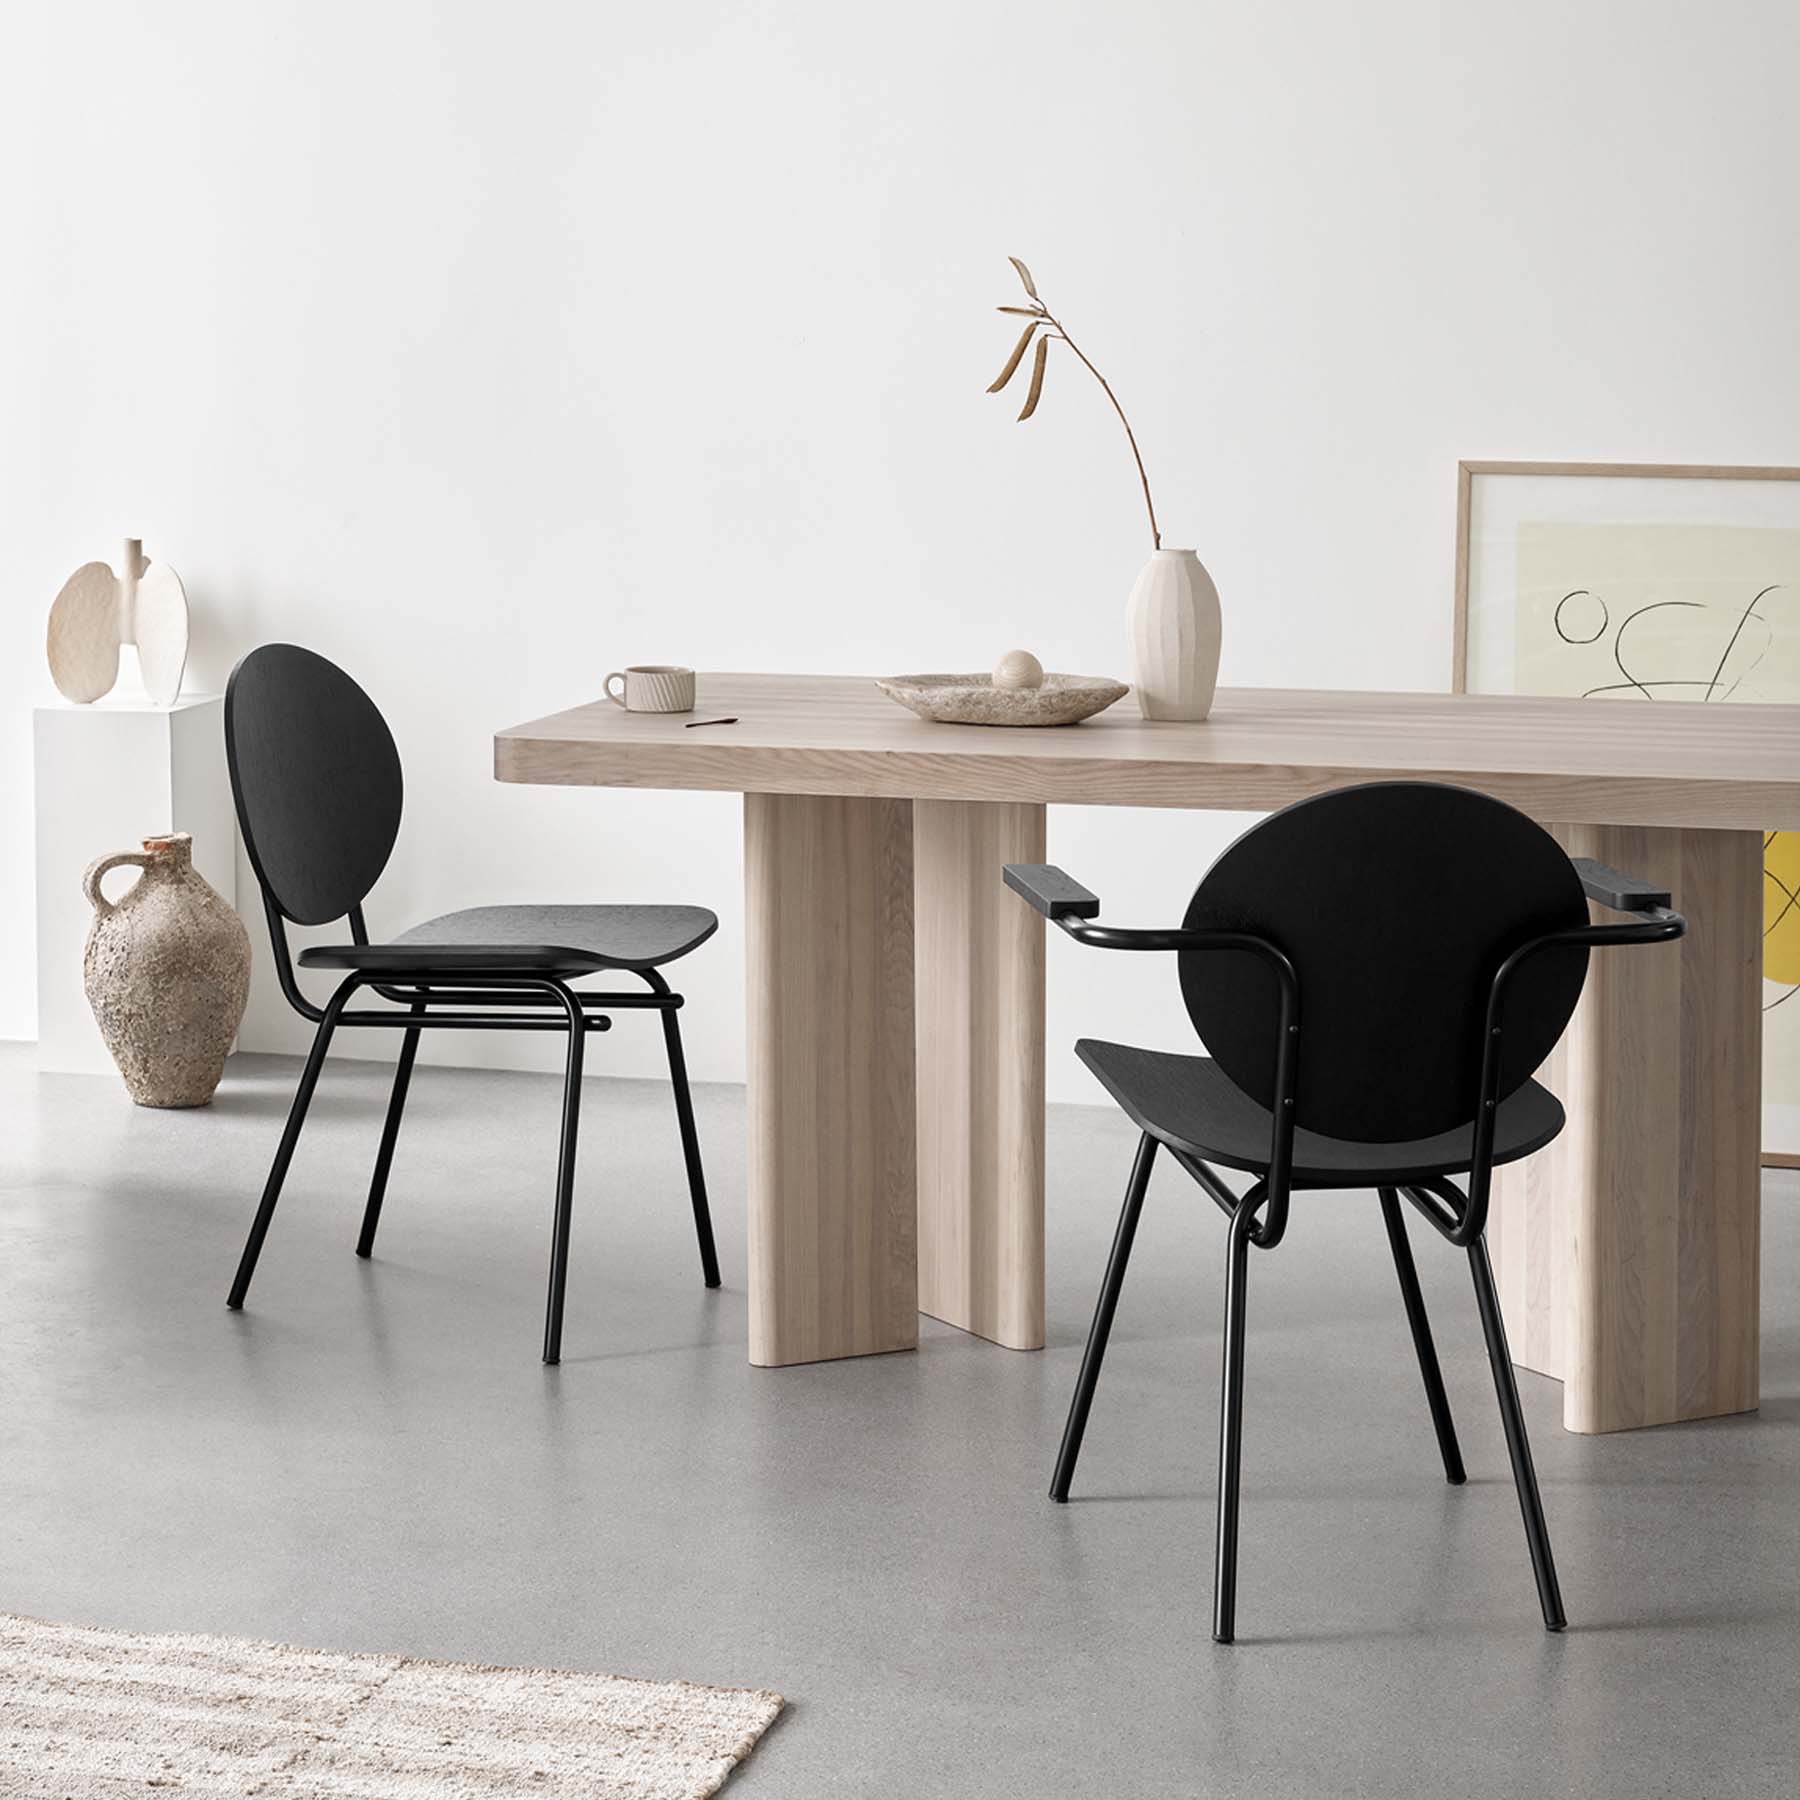 Dining table in solid ash styled with black dining chairs